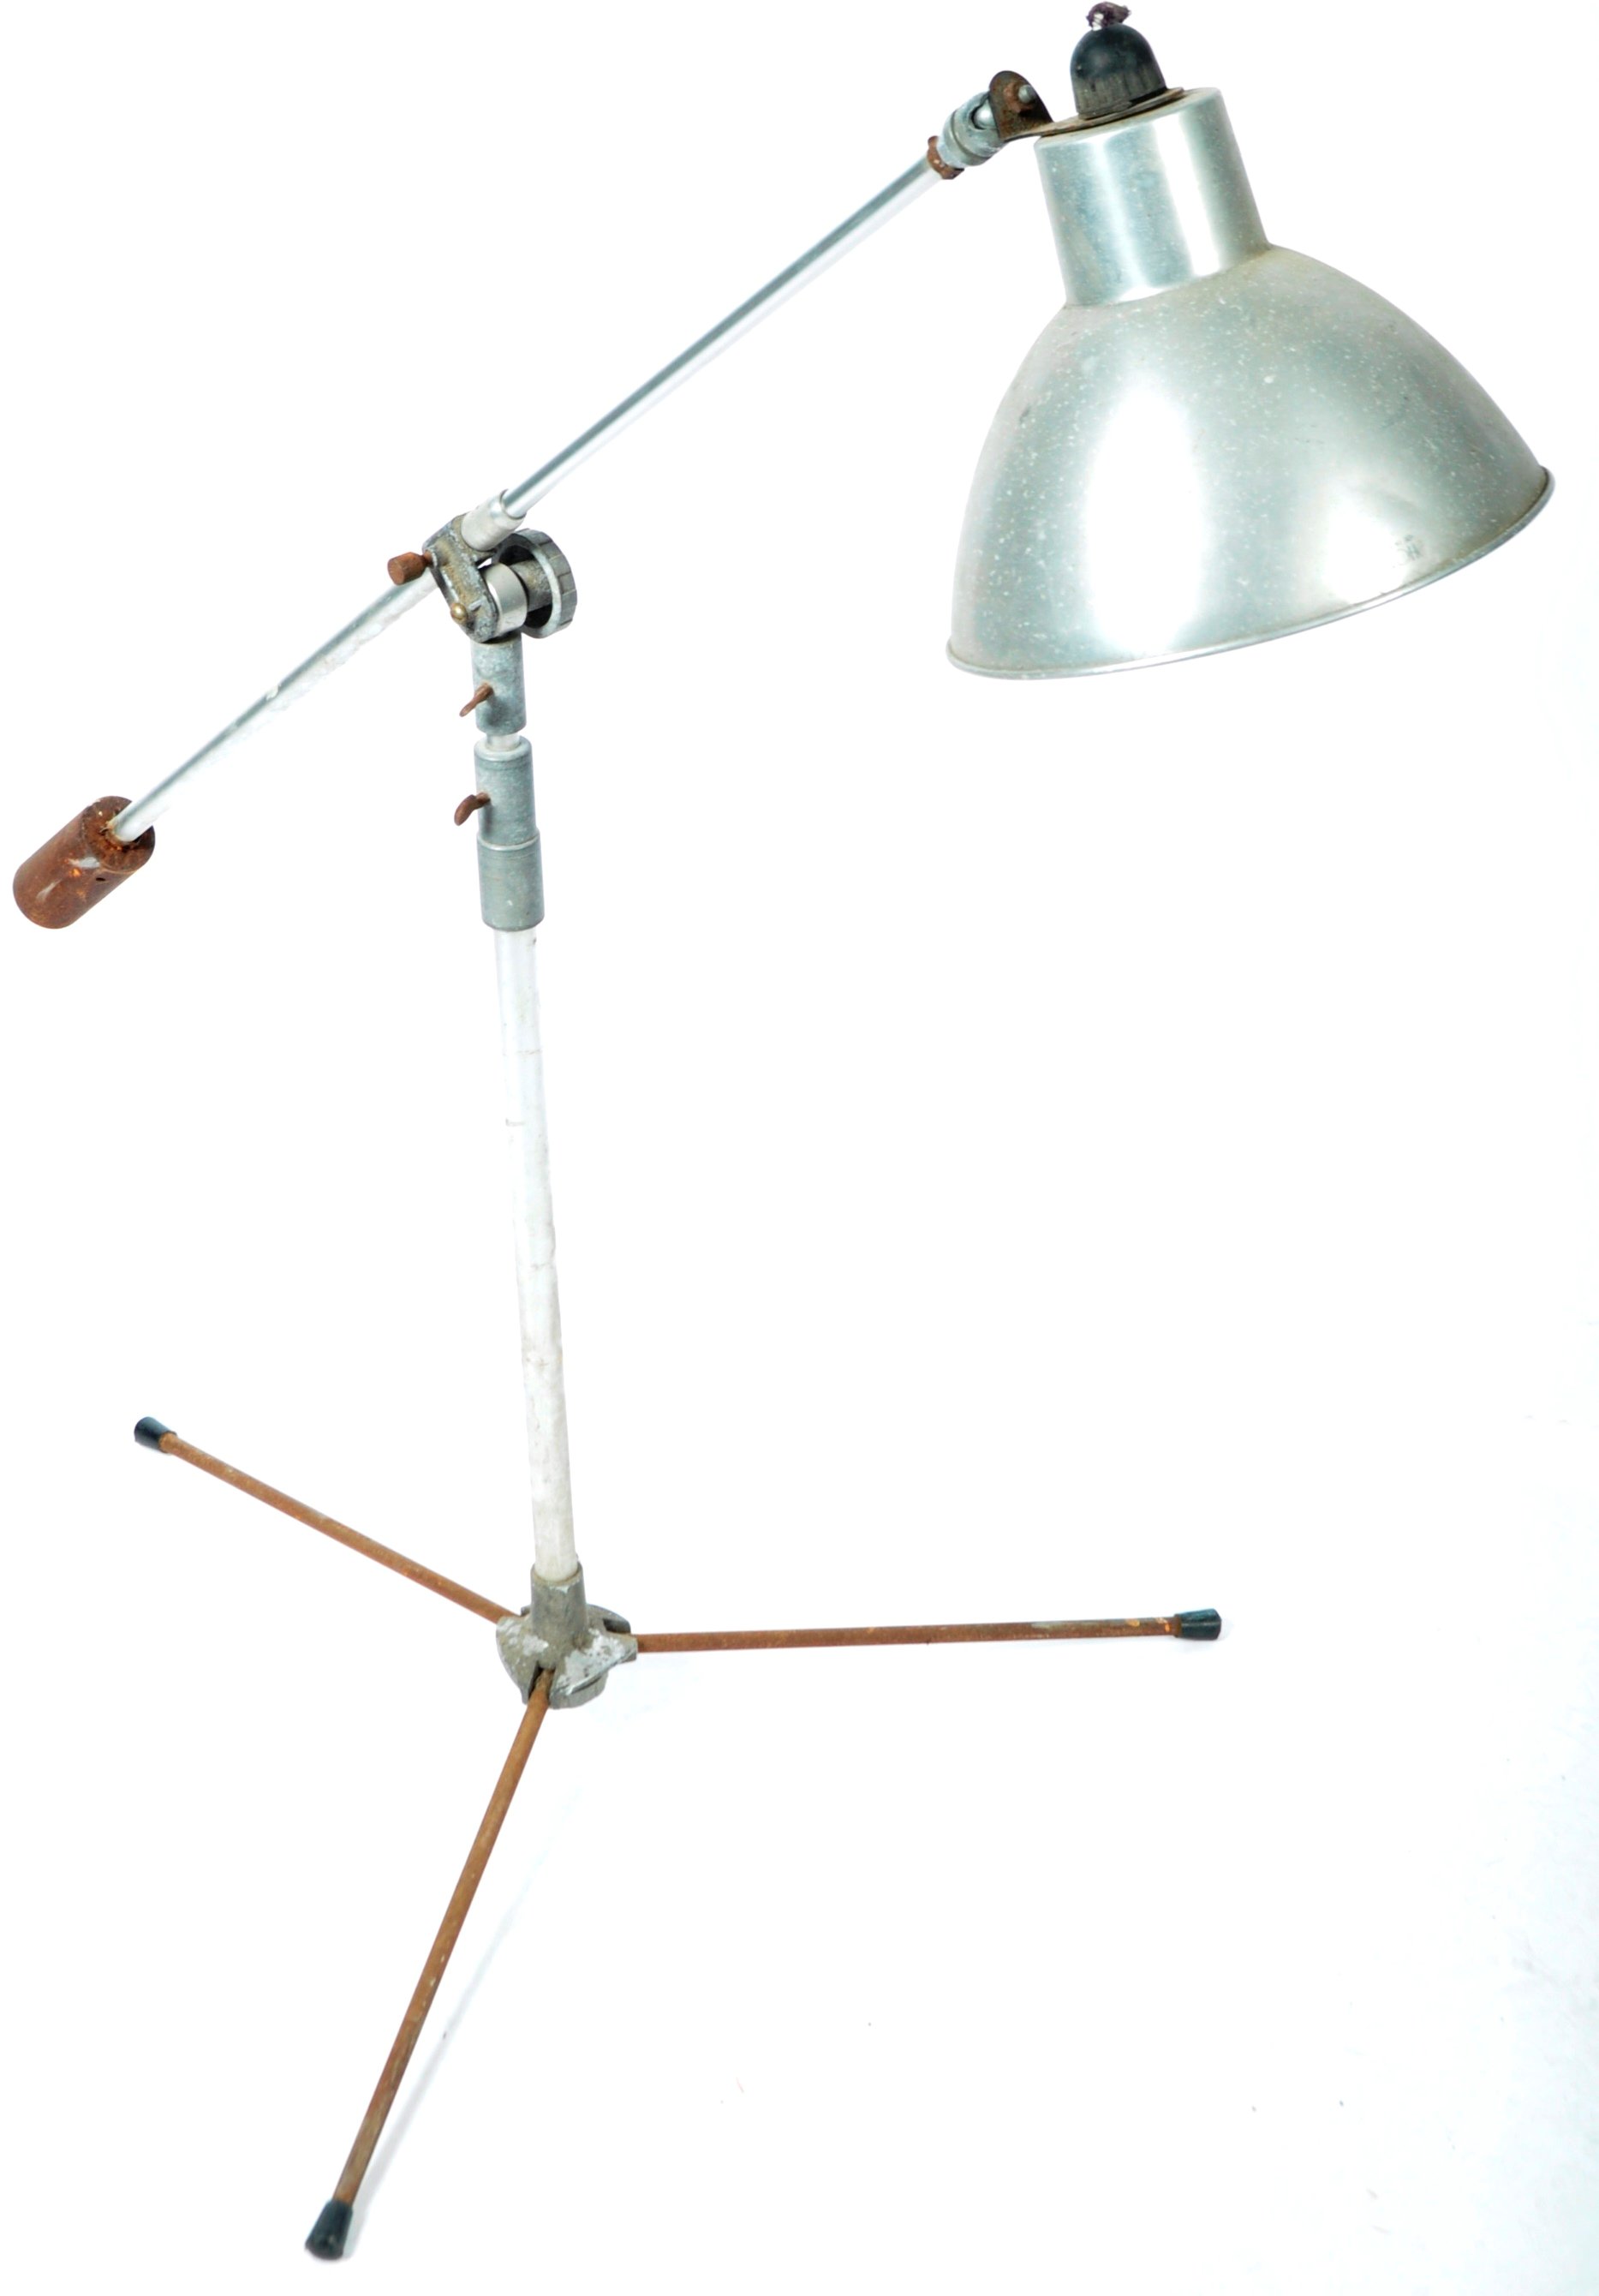 TWO MID CENTURY PHOTAX TRIPOD FLOOR STANDING LAMPS - Image 2 of 3